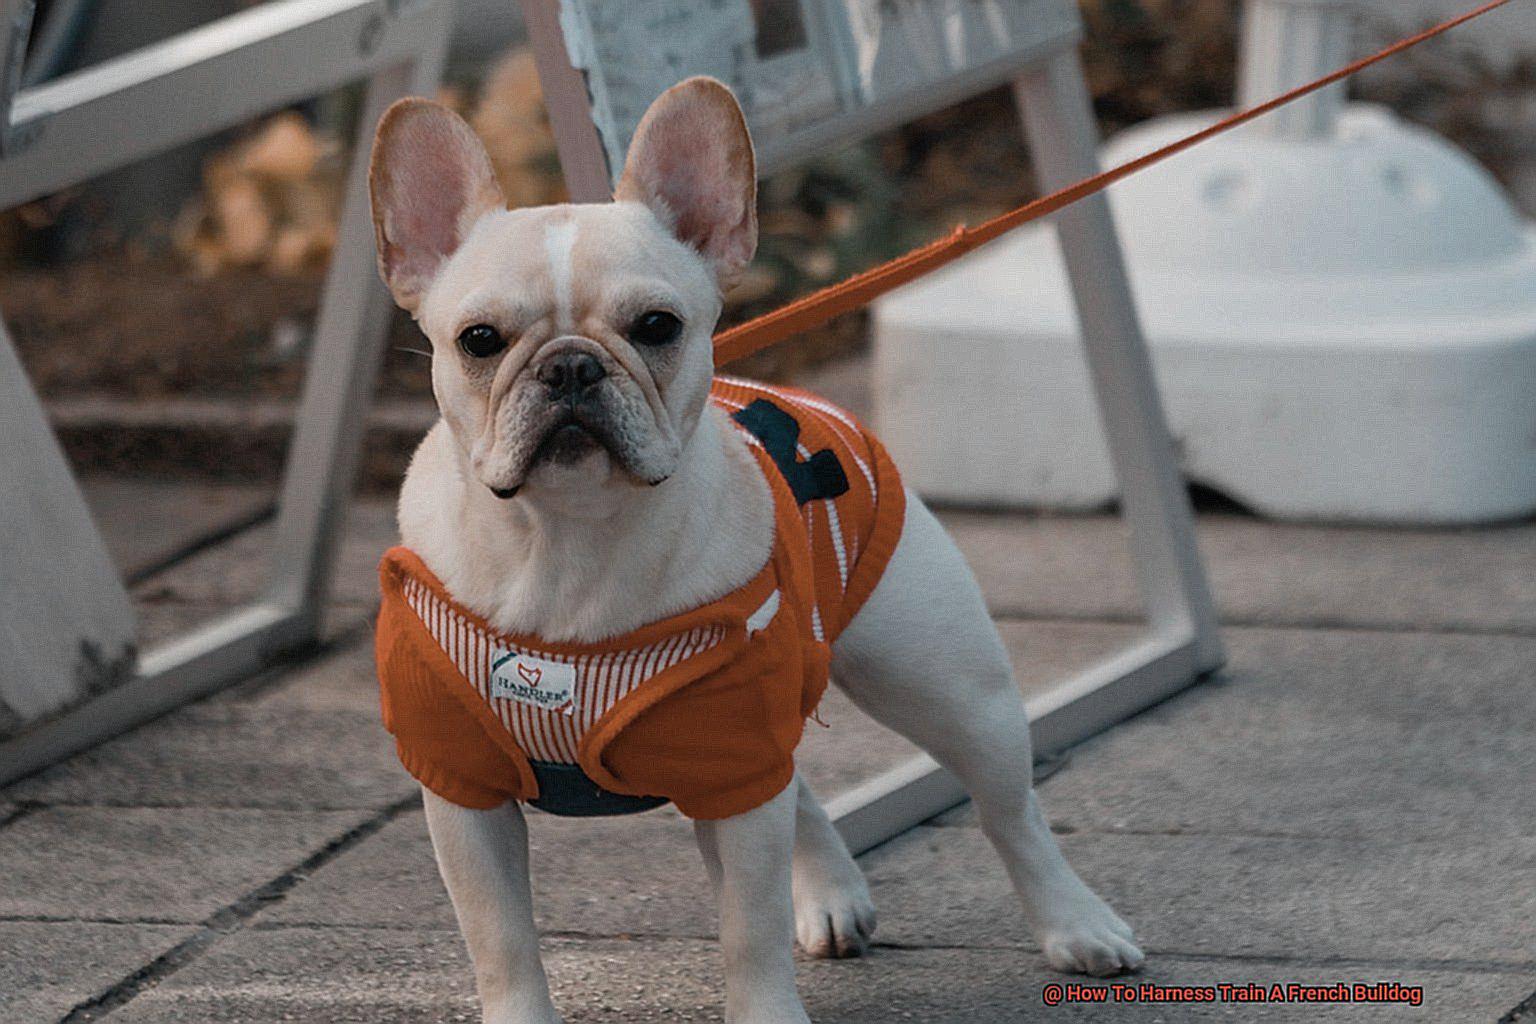 How To Harness Train A French Bulldog-7